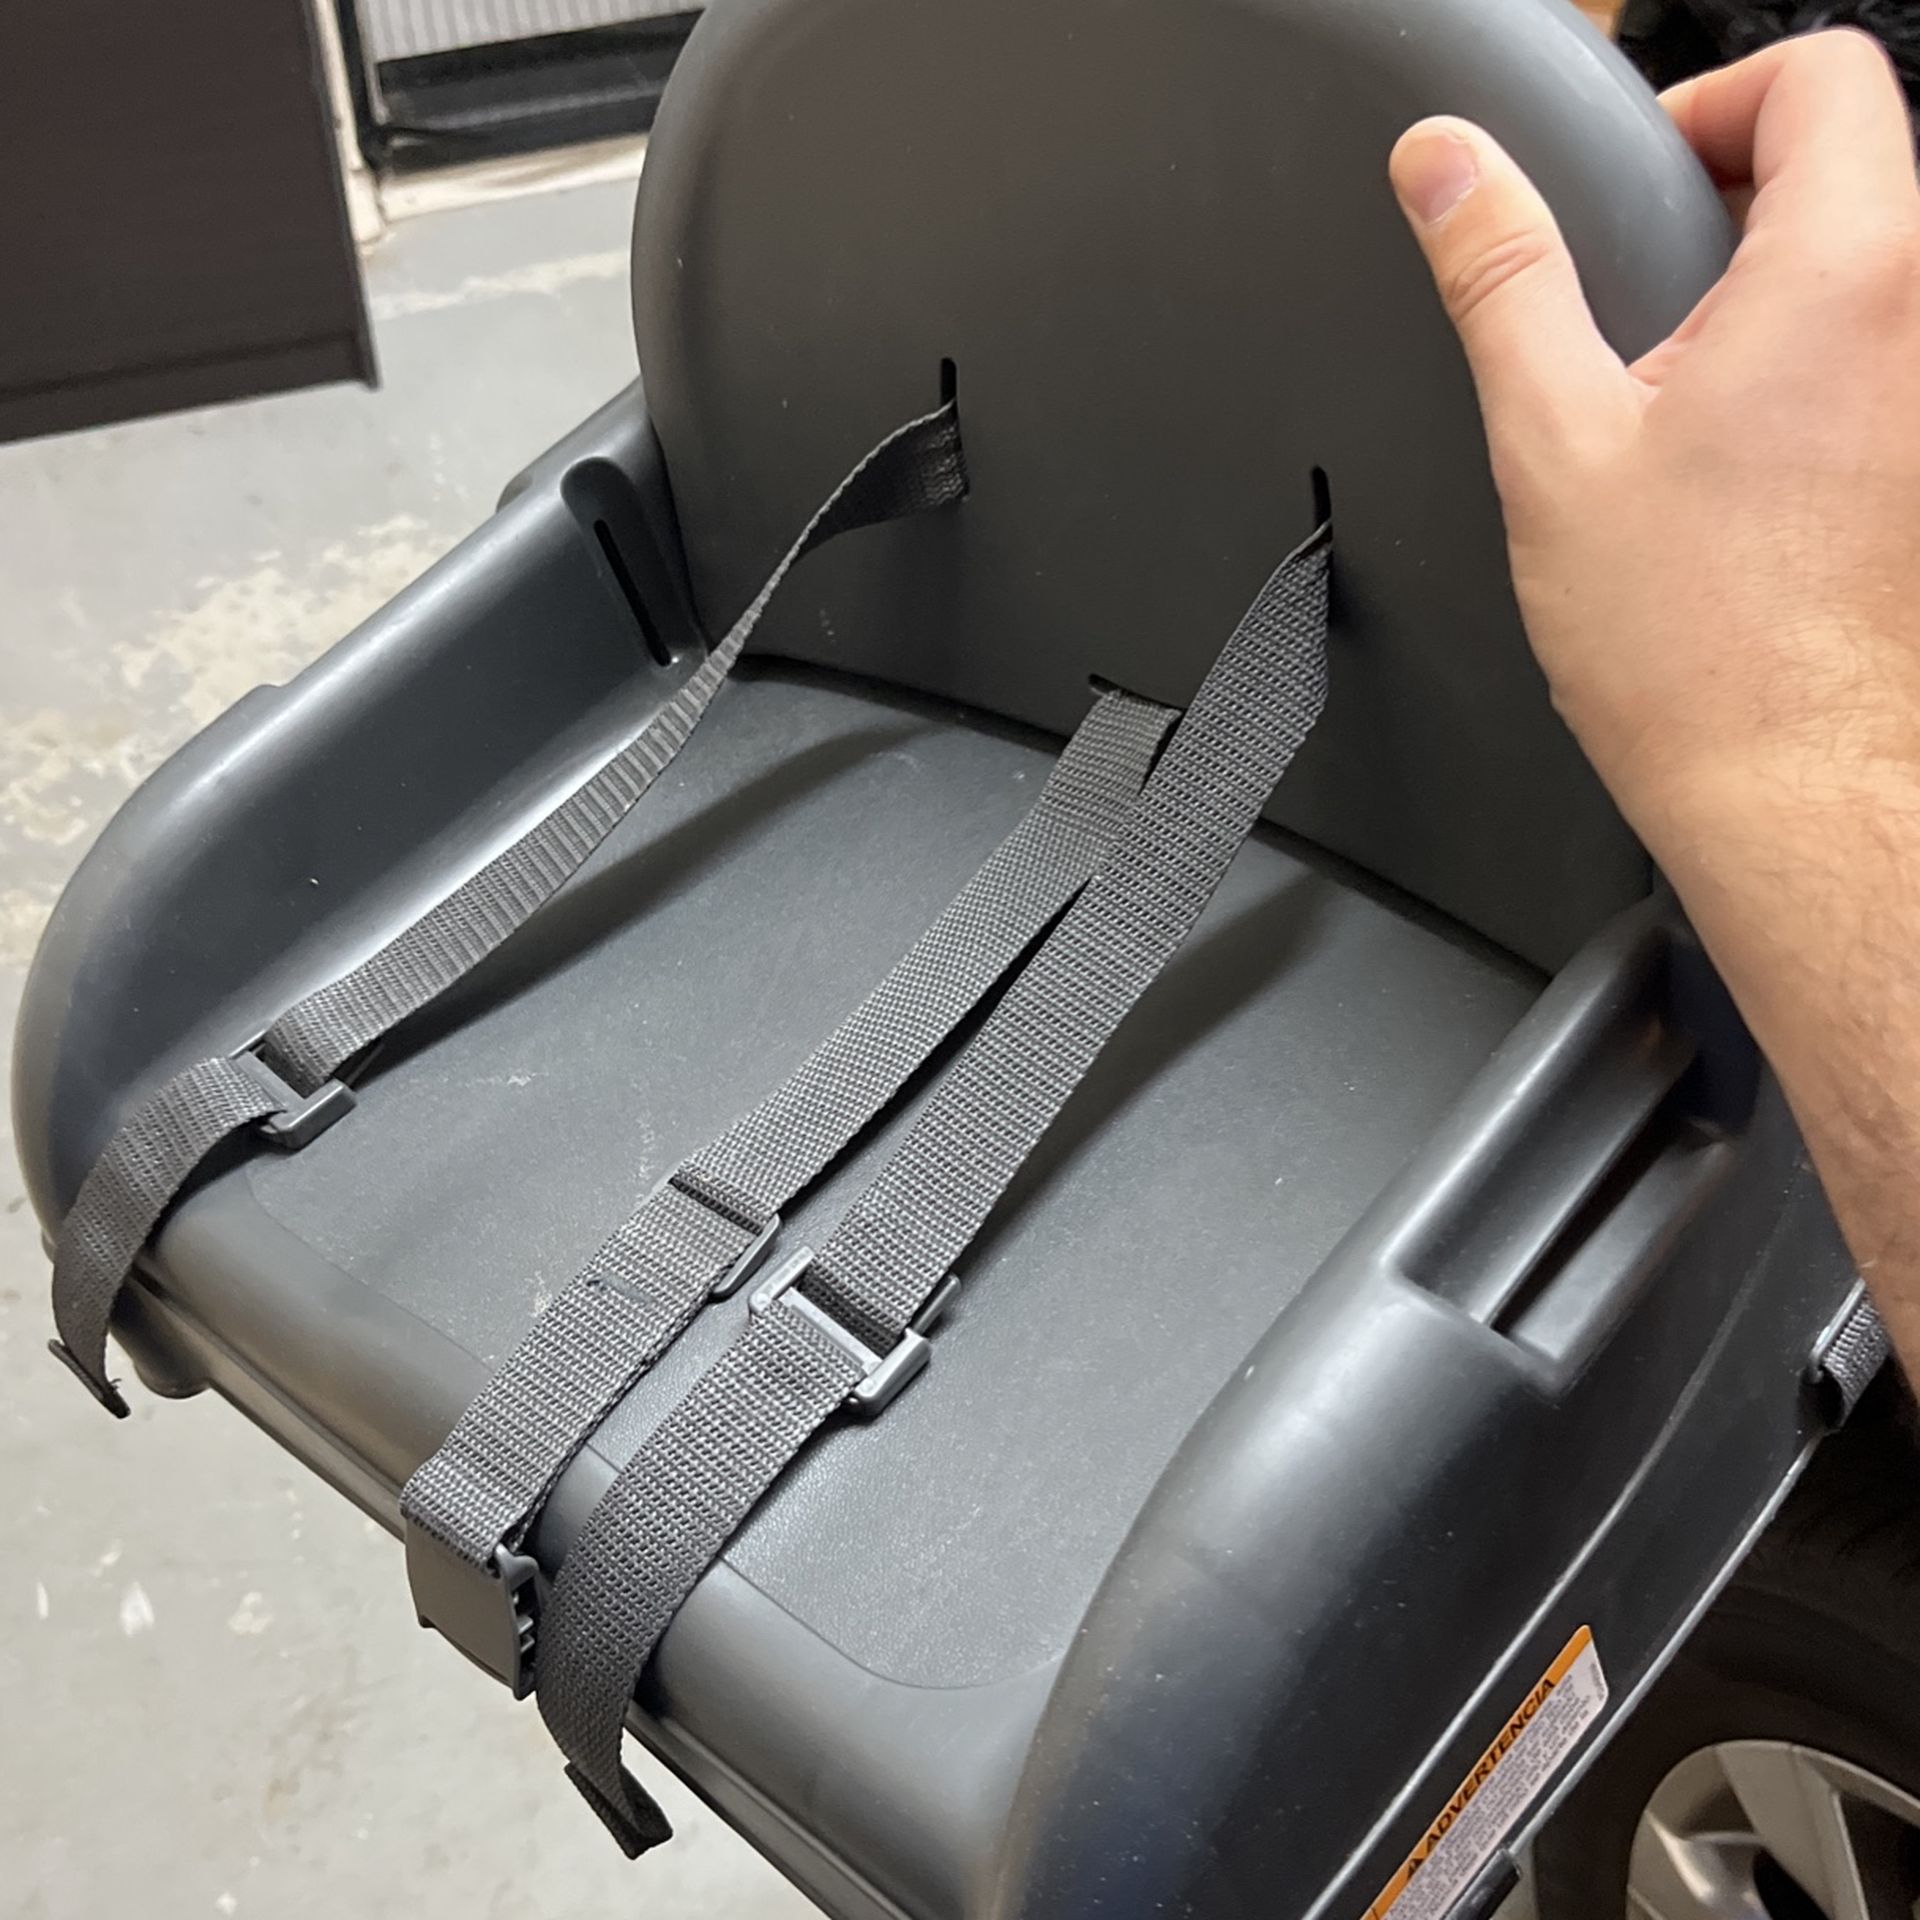 Graco Booster Seat Great Conditions 